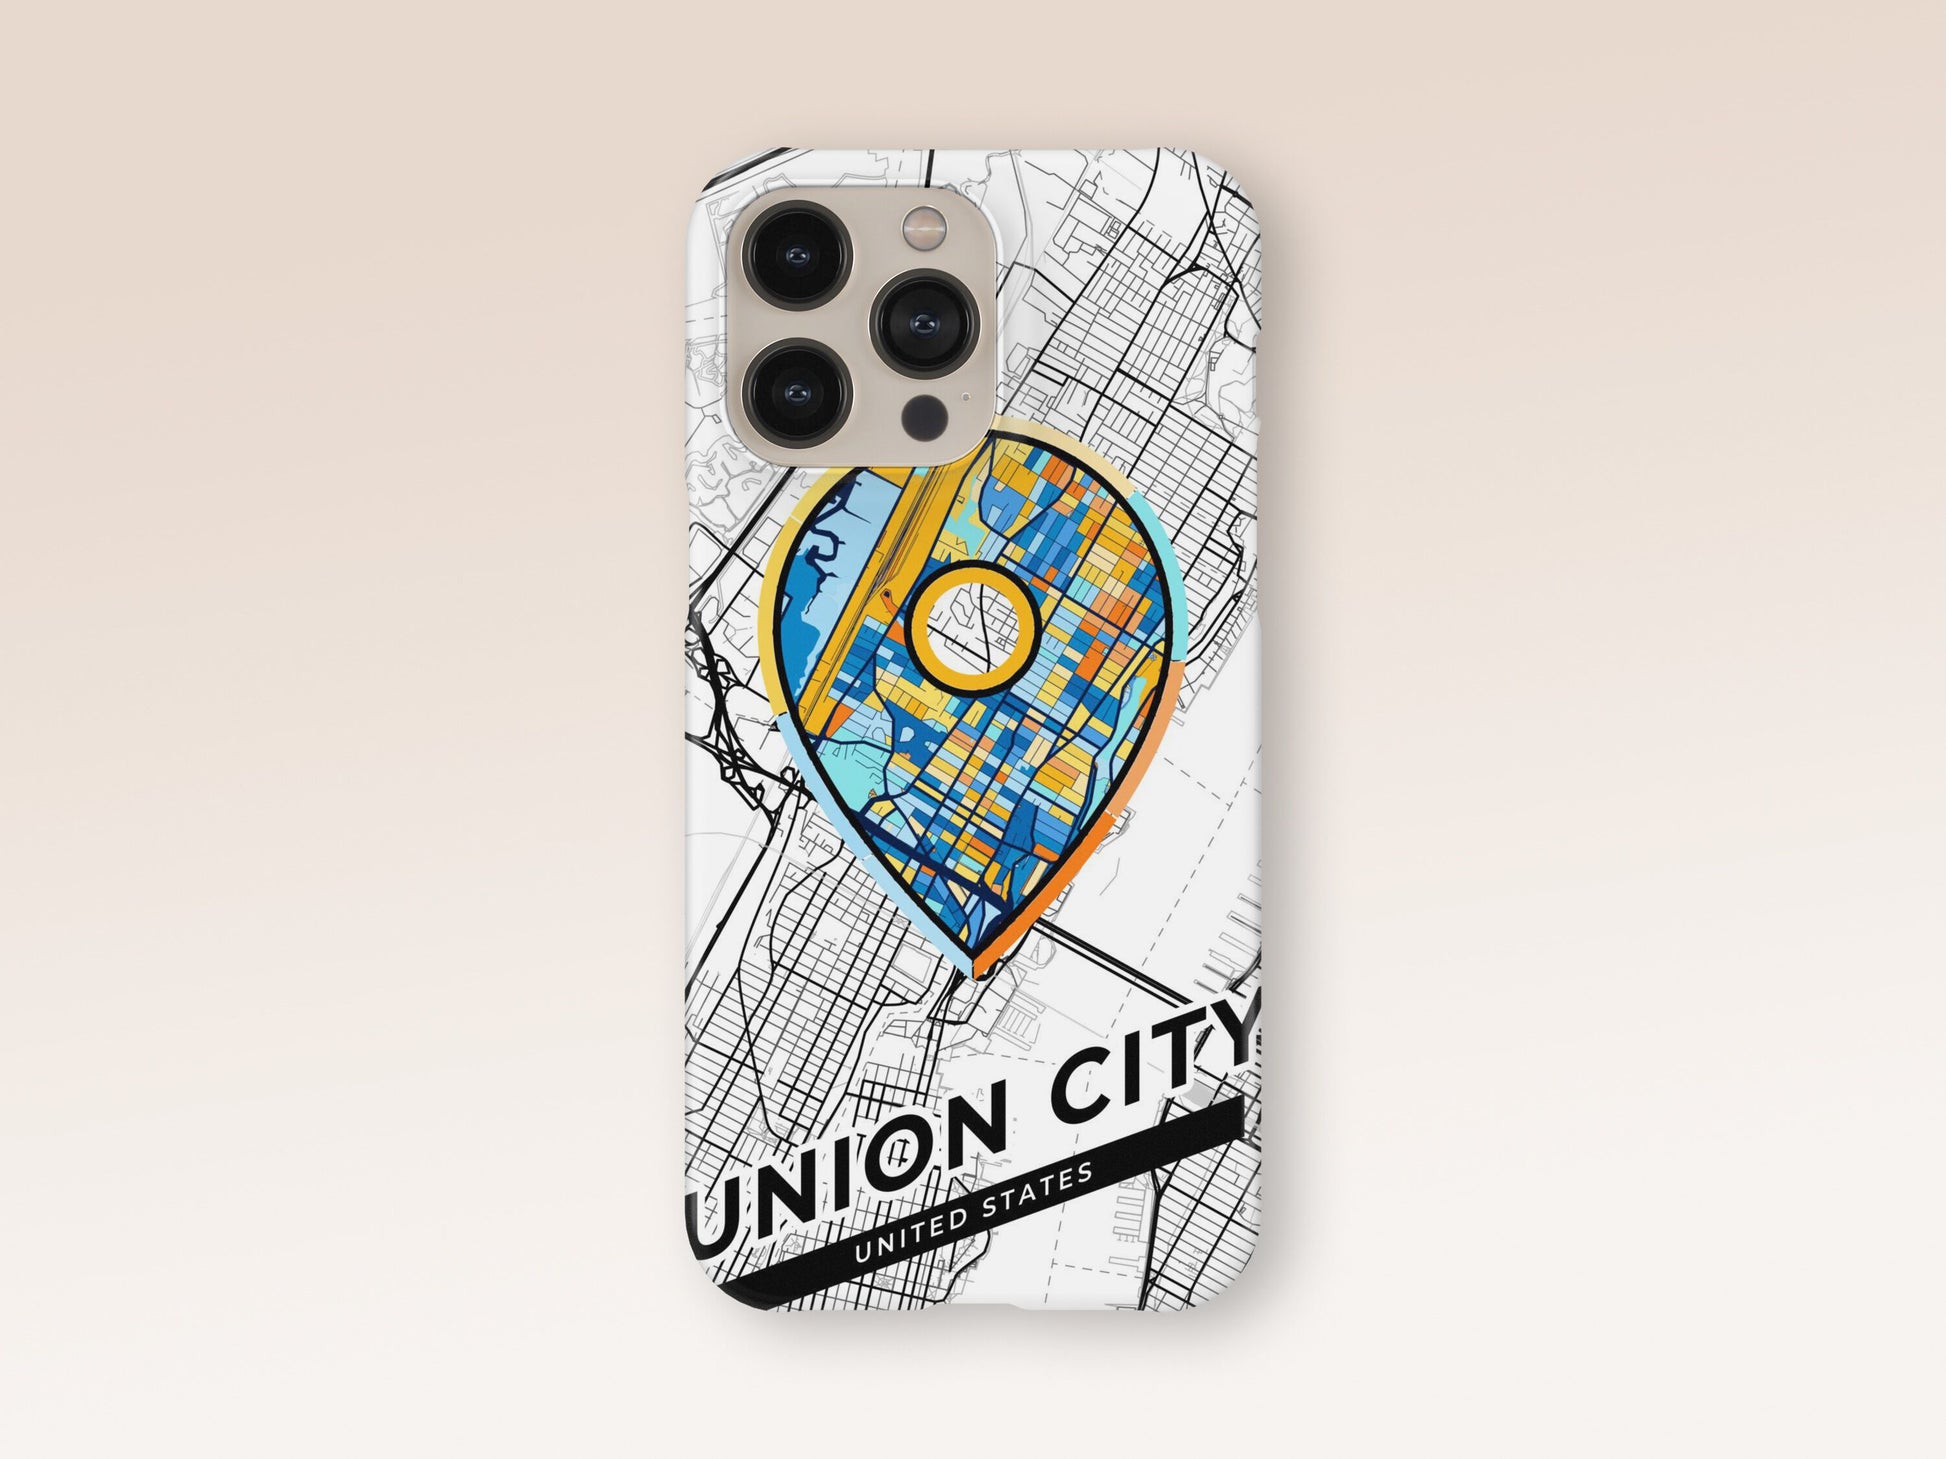 Union City New Jersey slim phone case with colorful icon 1